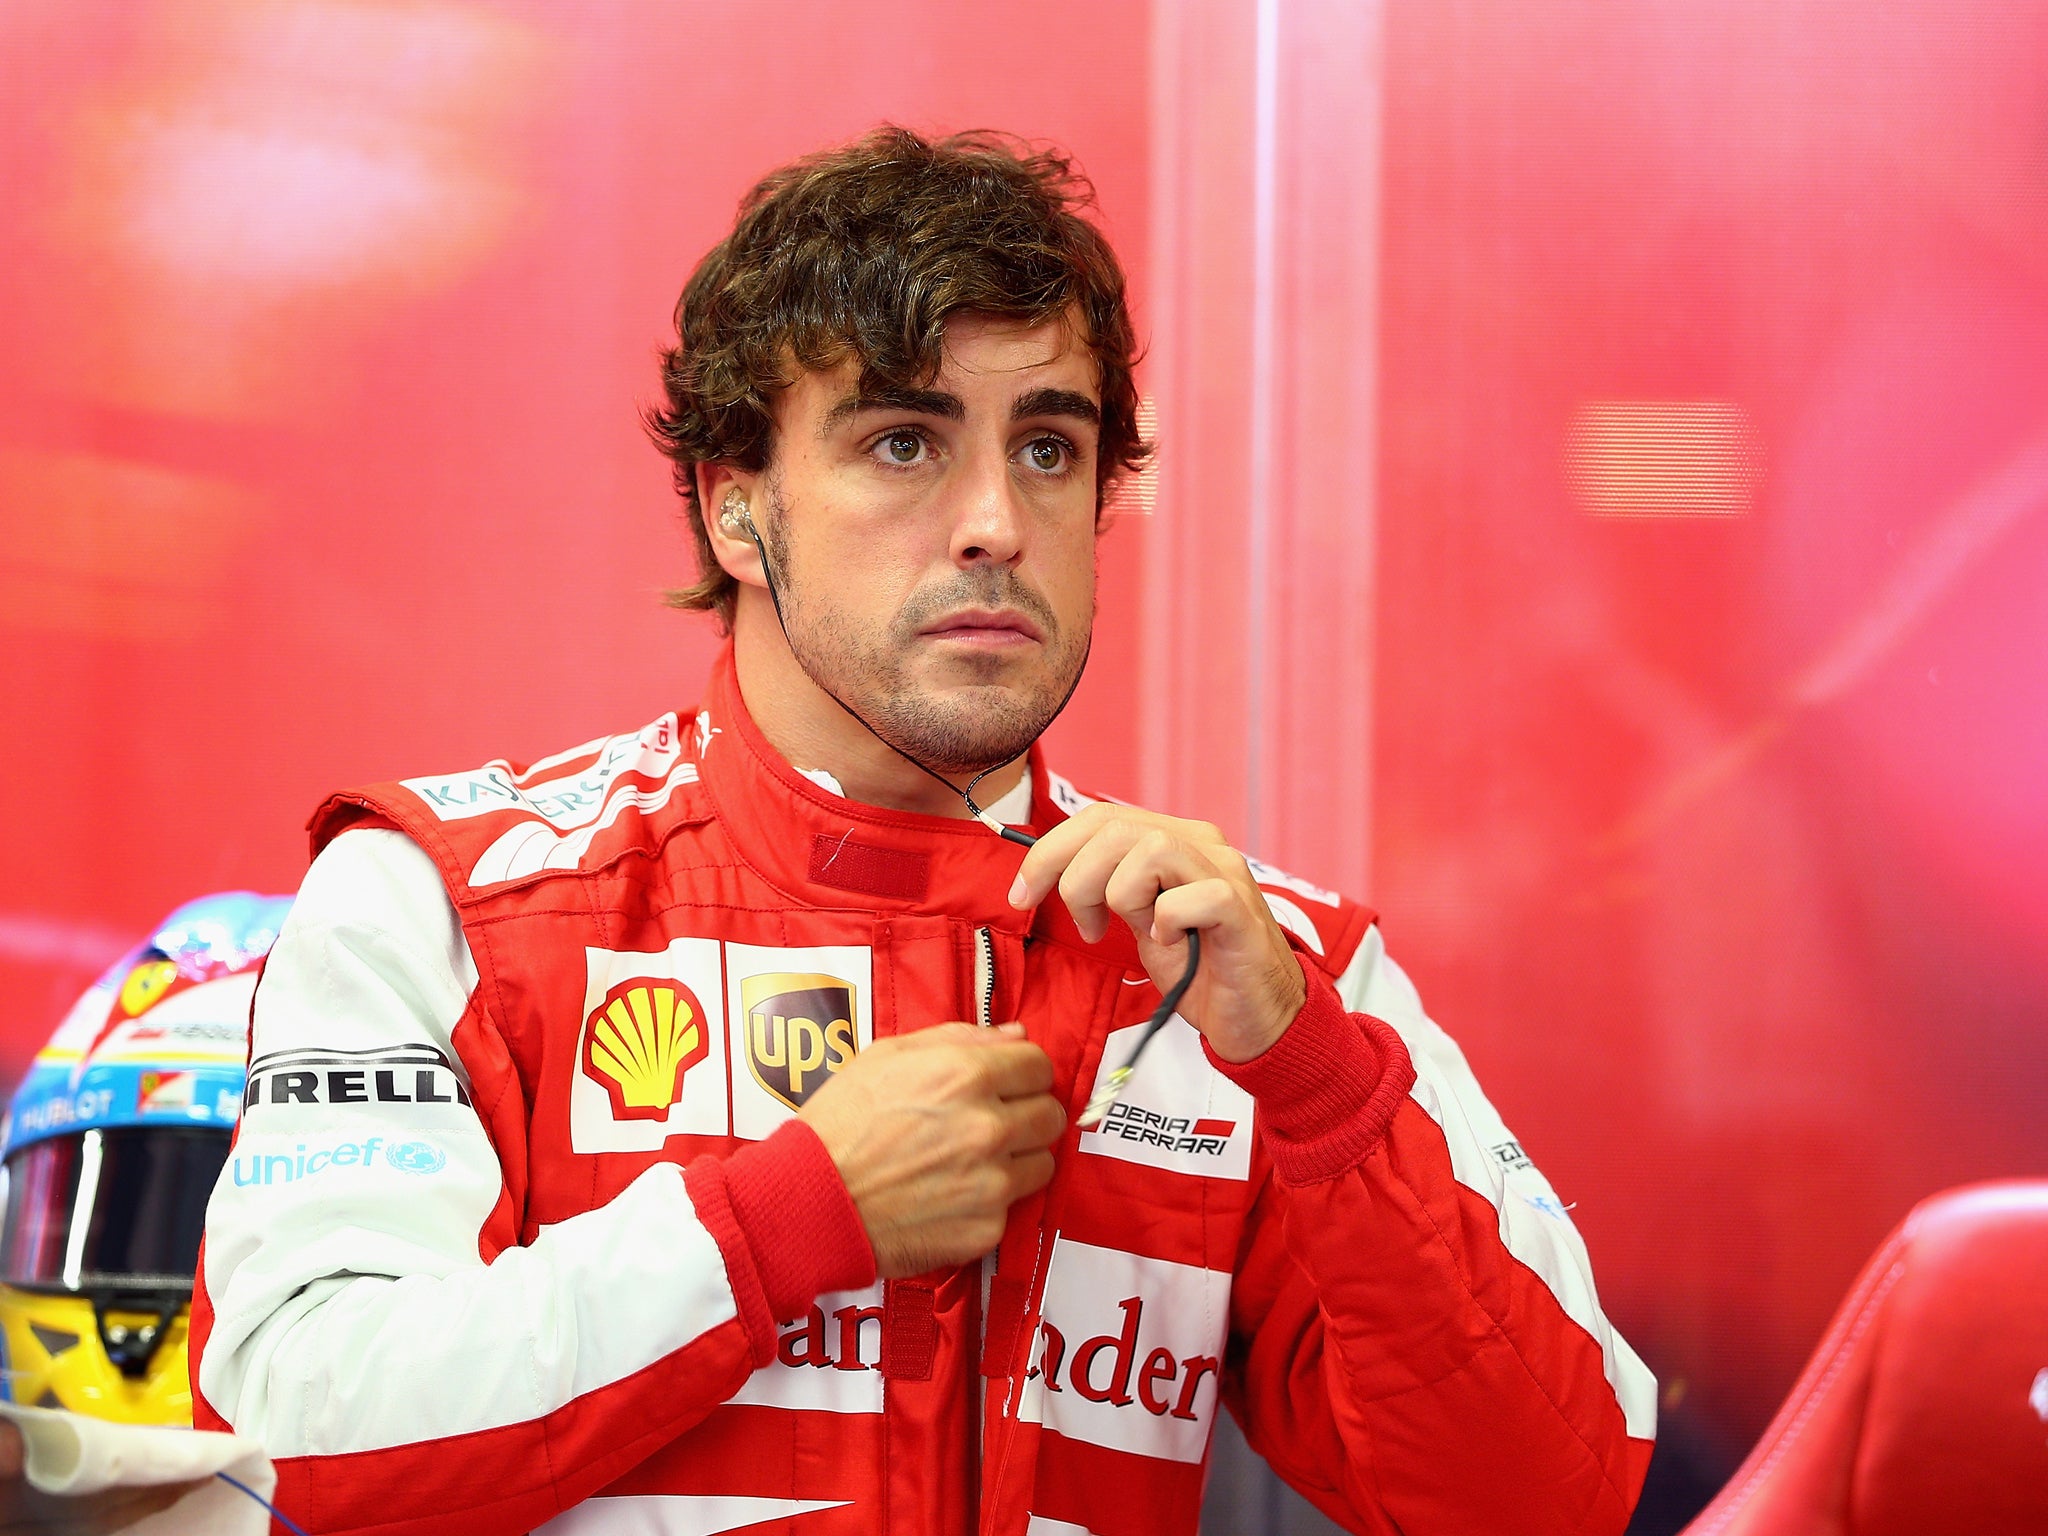 Fernando Alonso insists he wants to stay with Ferrari